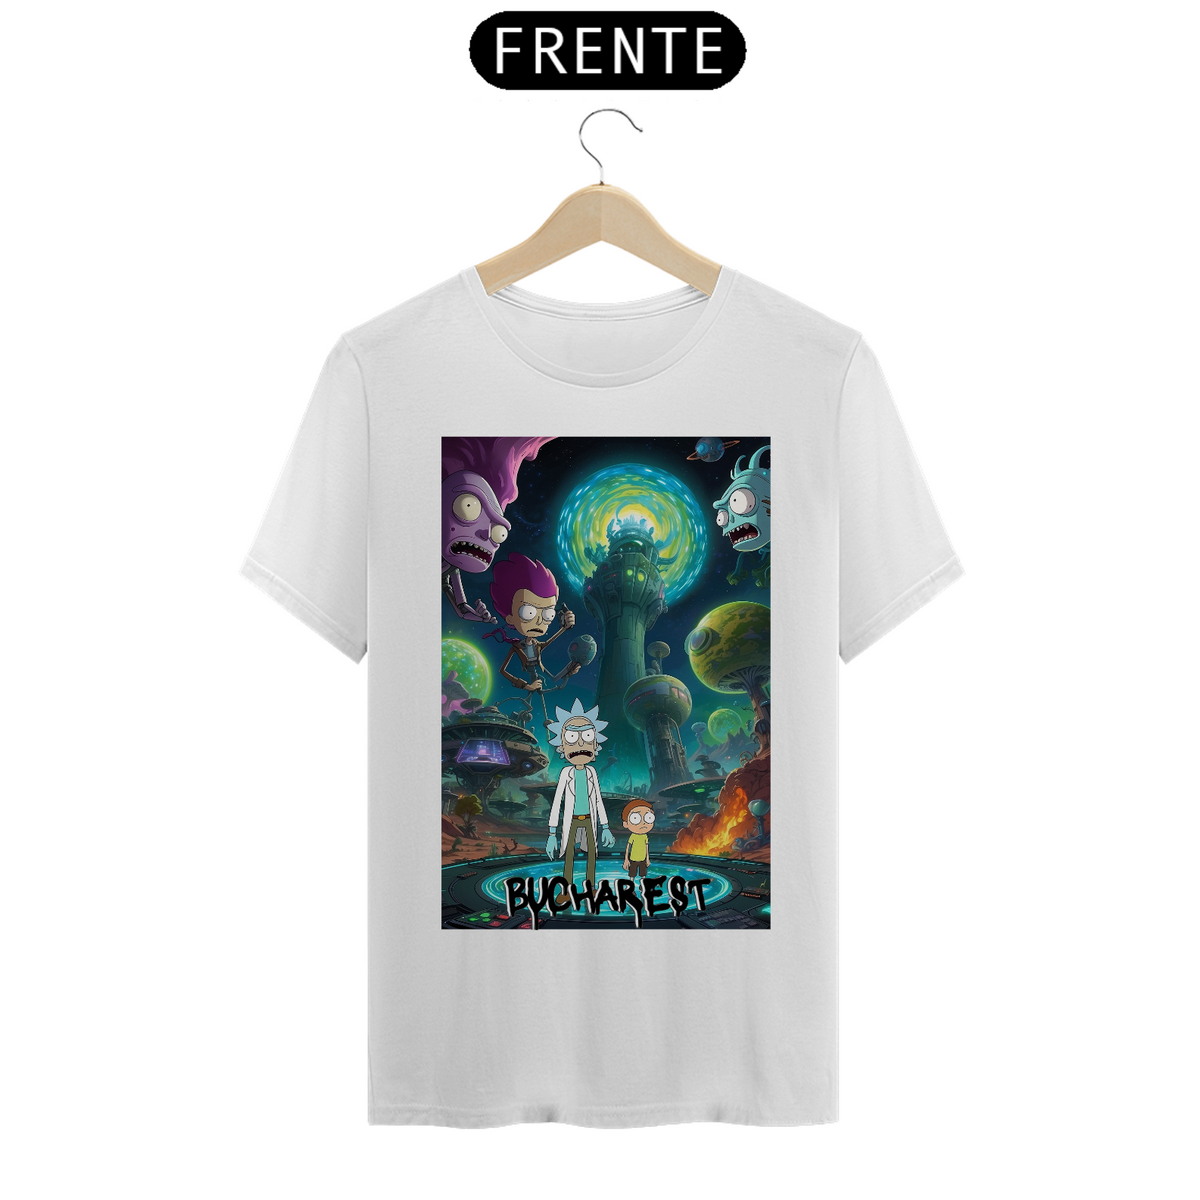 Nome do produto: CAMISETA UNISSEX - Rick and Morty facing off against formid...